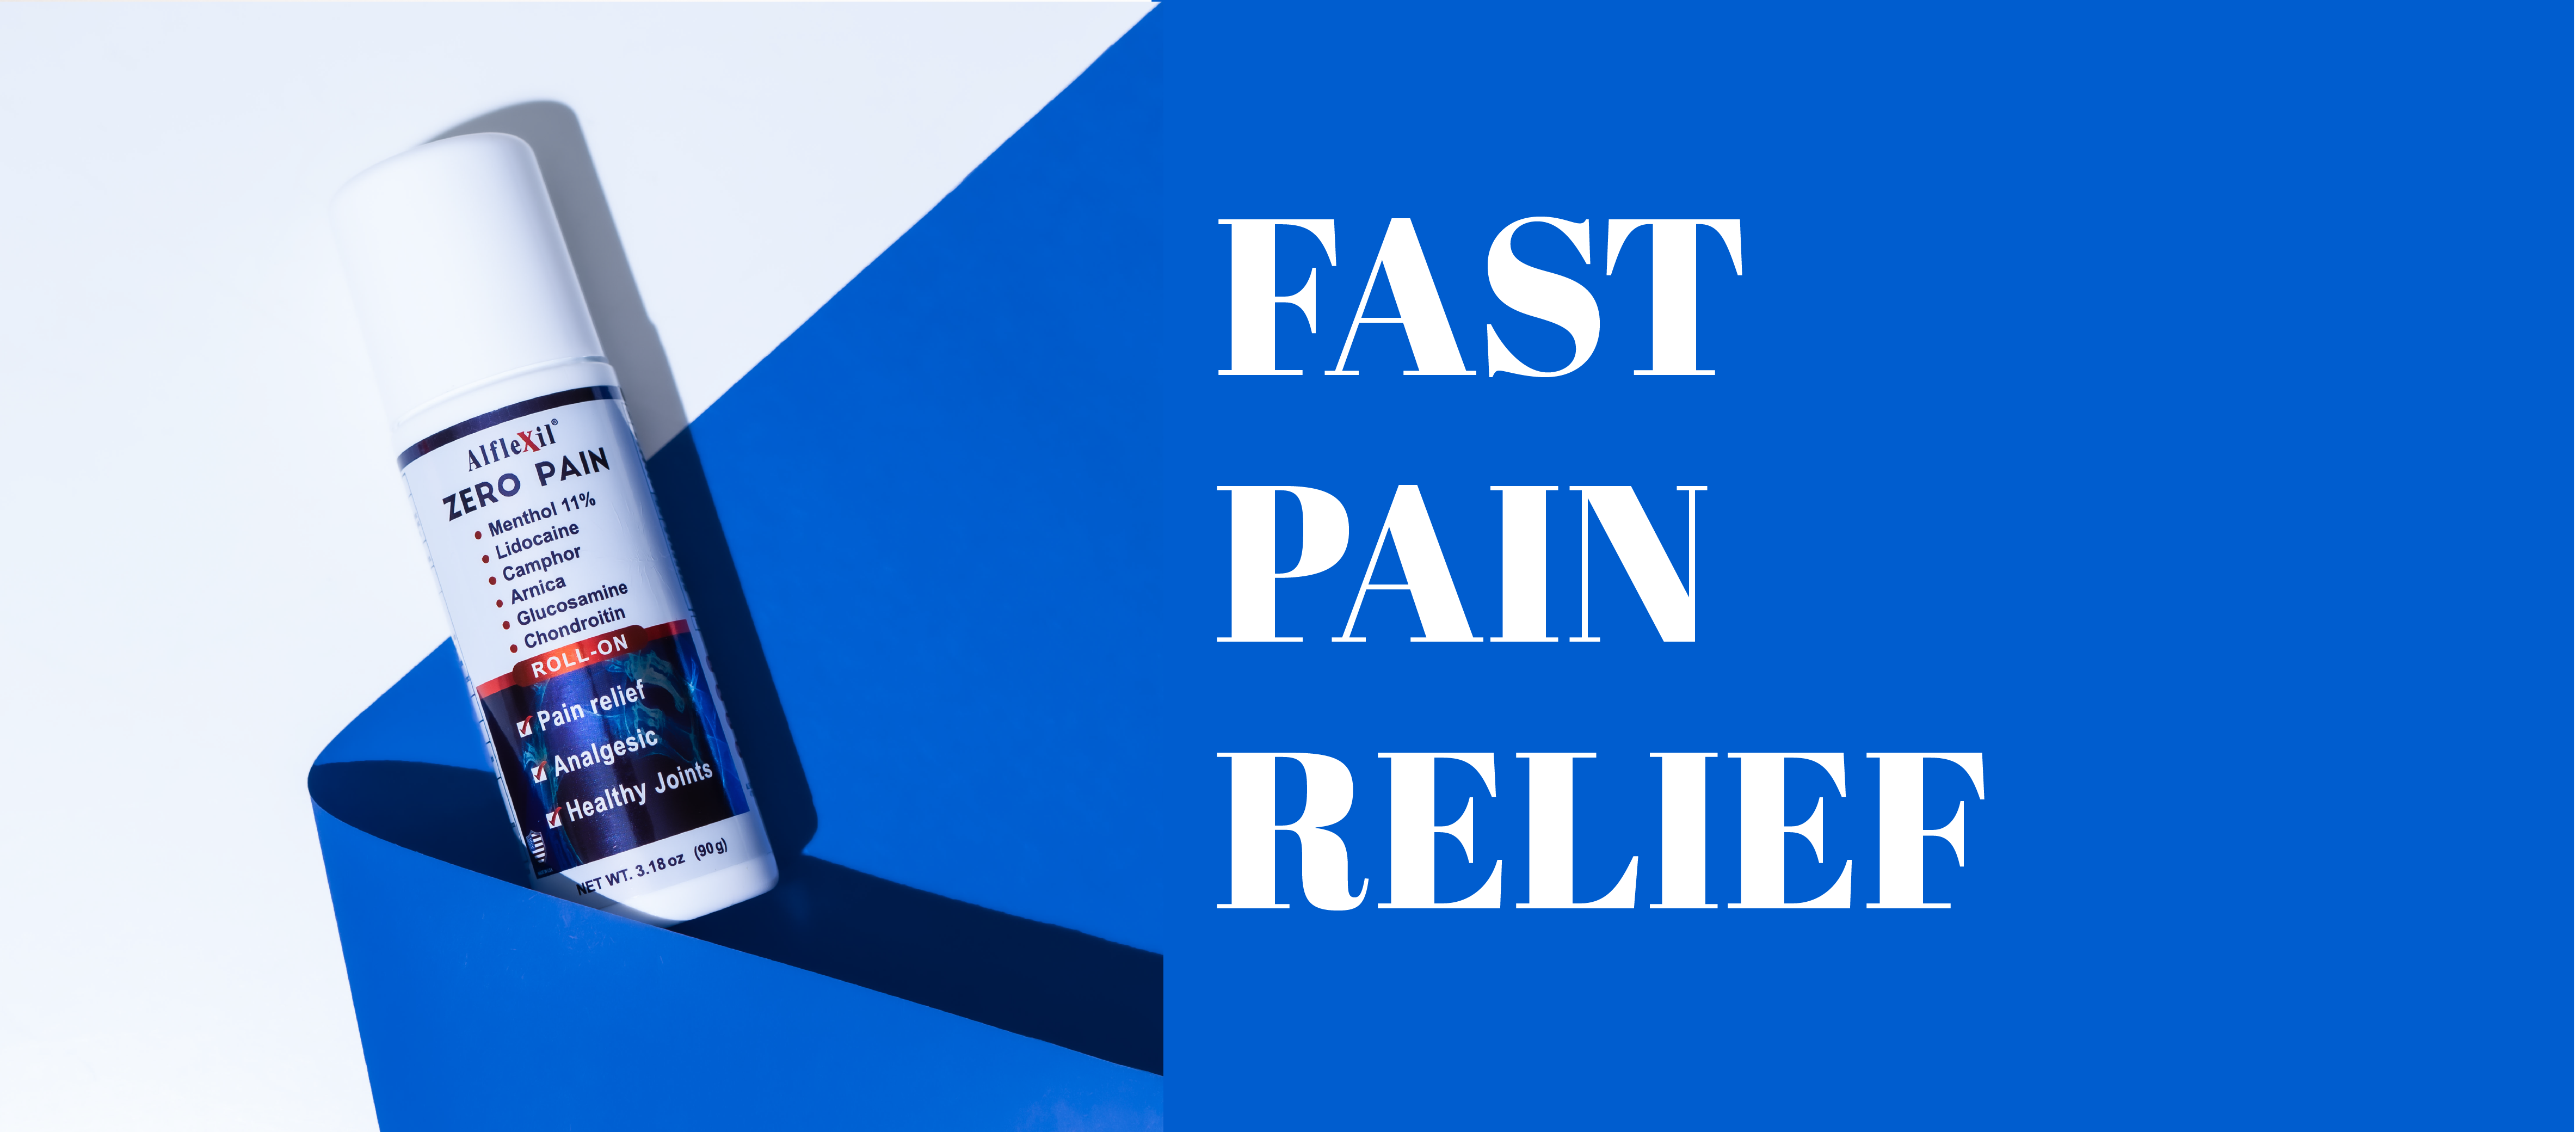 ALFLEXIL Pain Relief Roll-On - 3.18 oz.